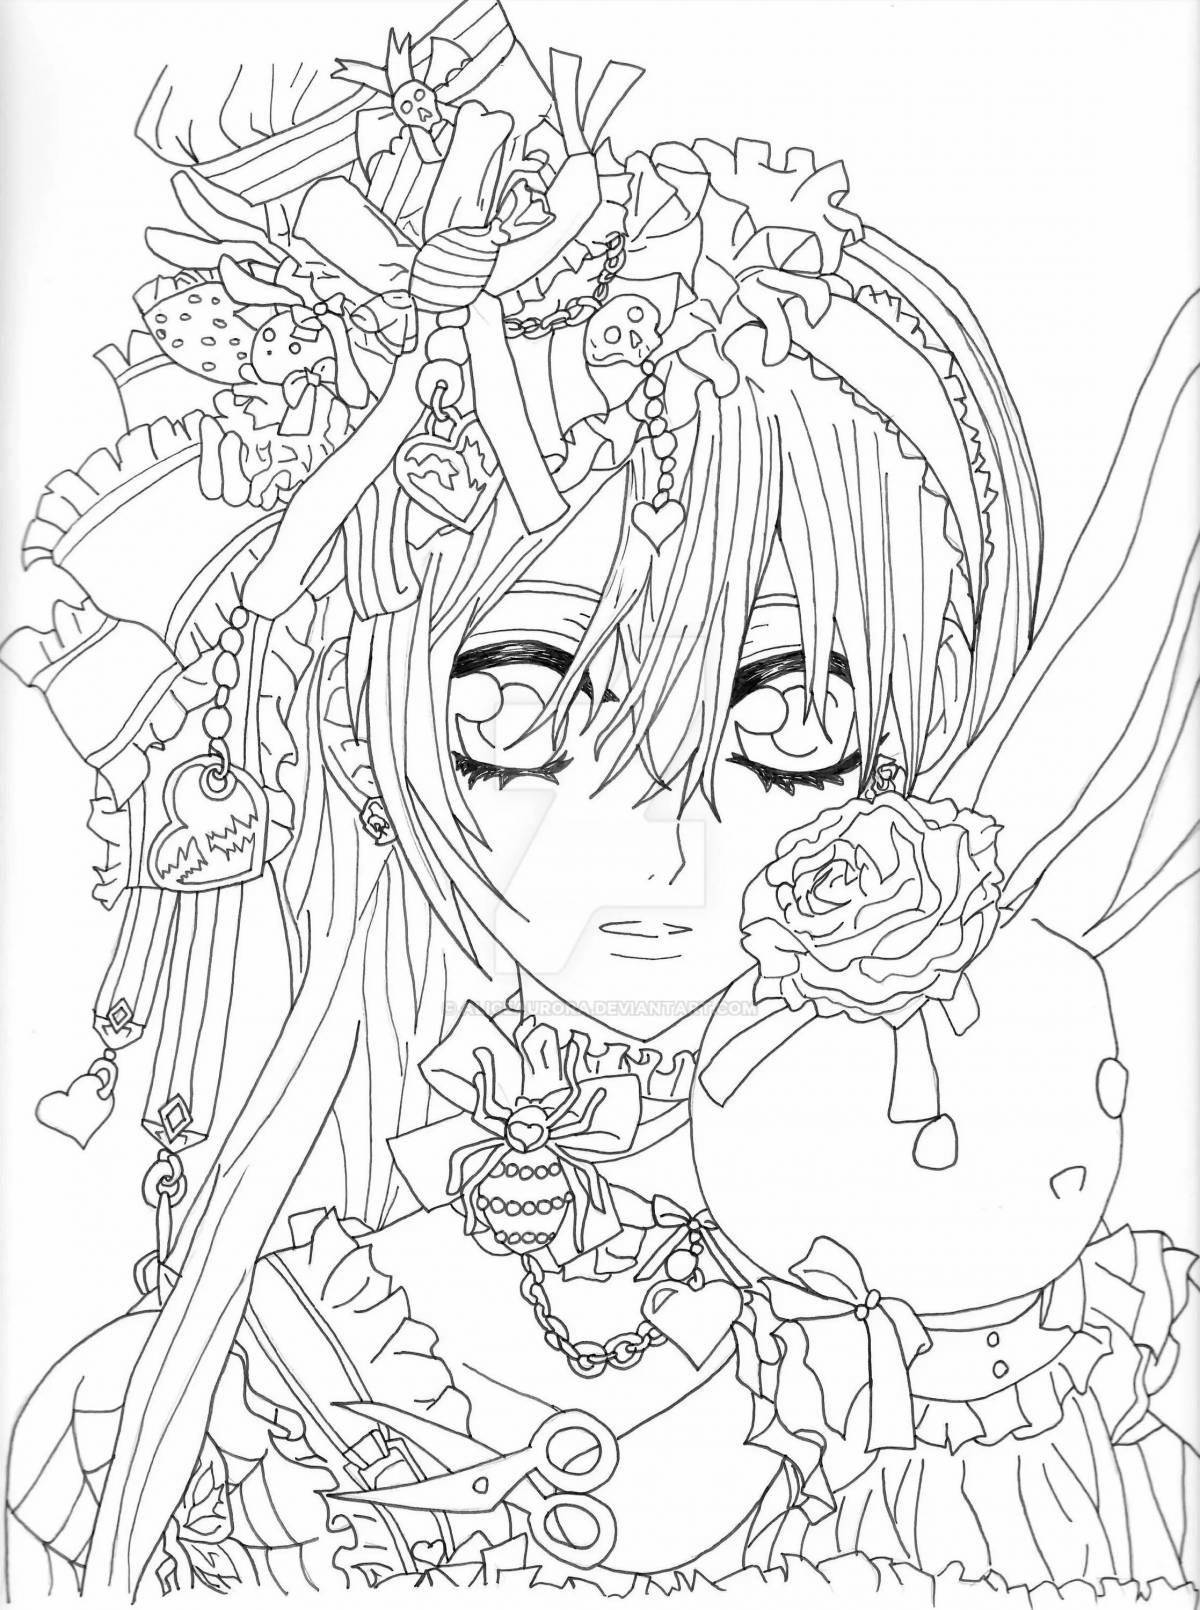 Charming complex anime coloring book for girls